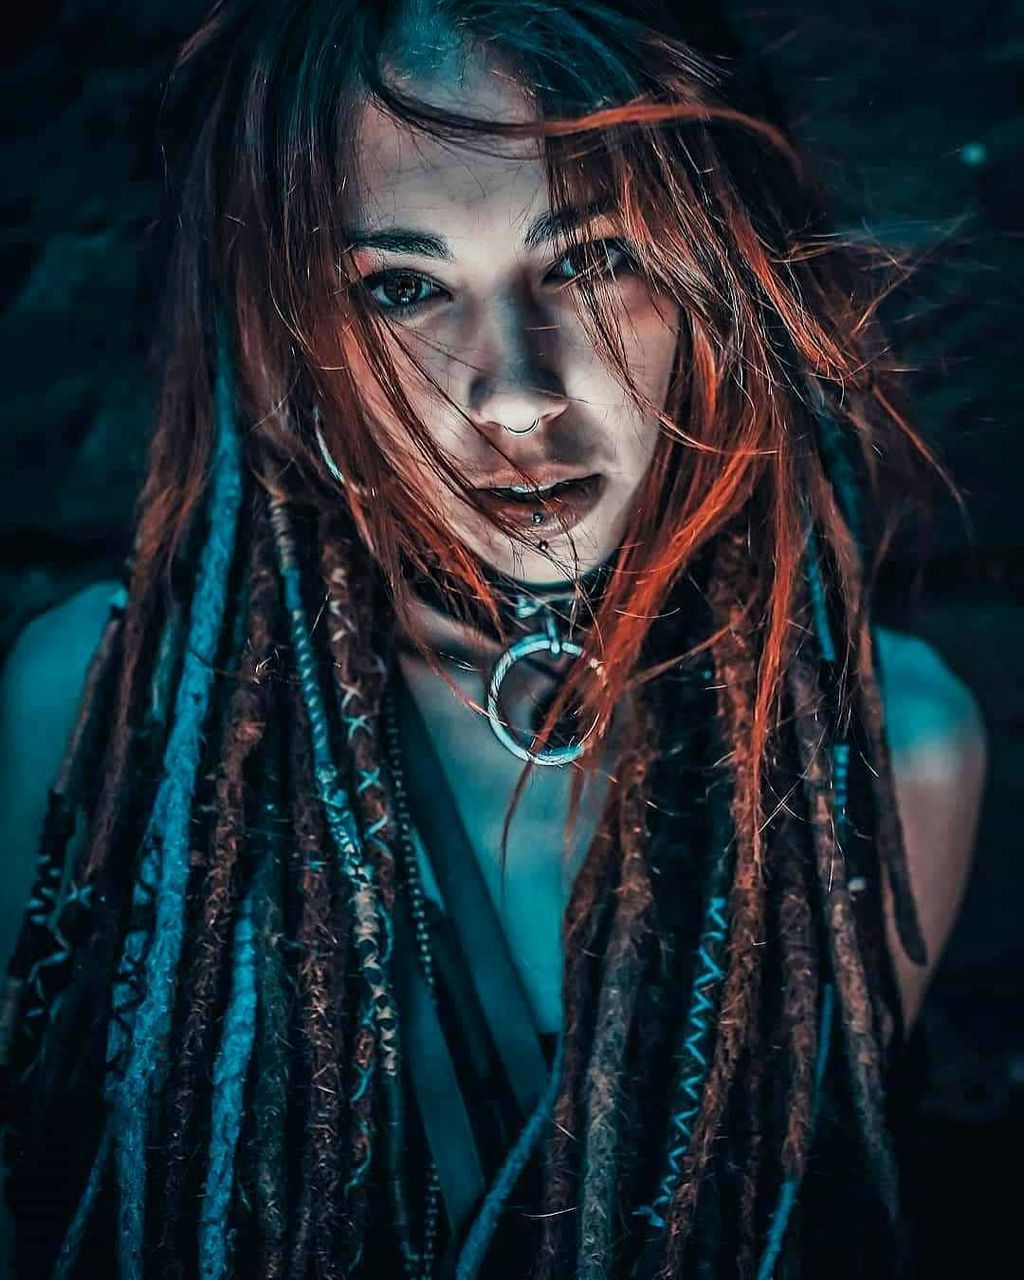 dreadlocks, one person, hairstyle, long hair, portrait, adult, women, blue, young adult, human hair, darkness, headshot, arts culture and entertainment, looking at camera, emotion, female, night, fashion, brown hair, music, nature, looking